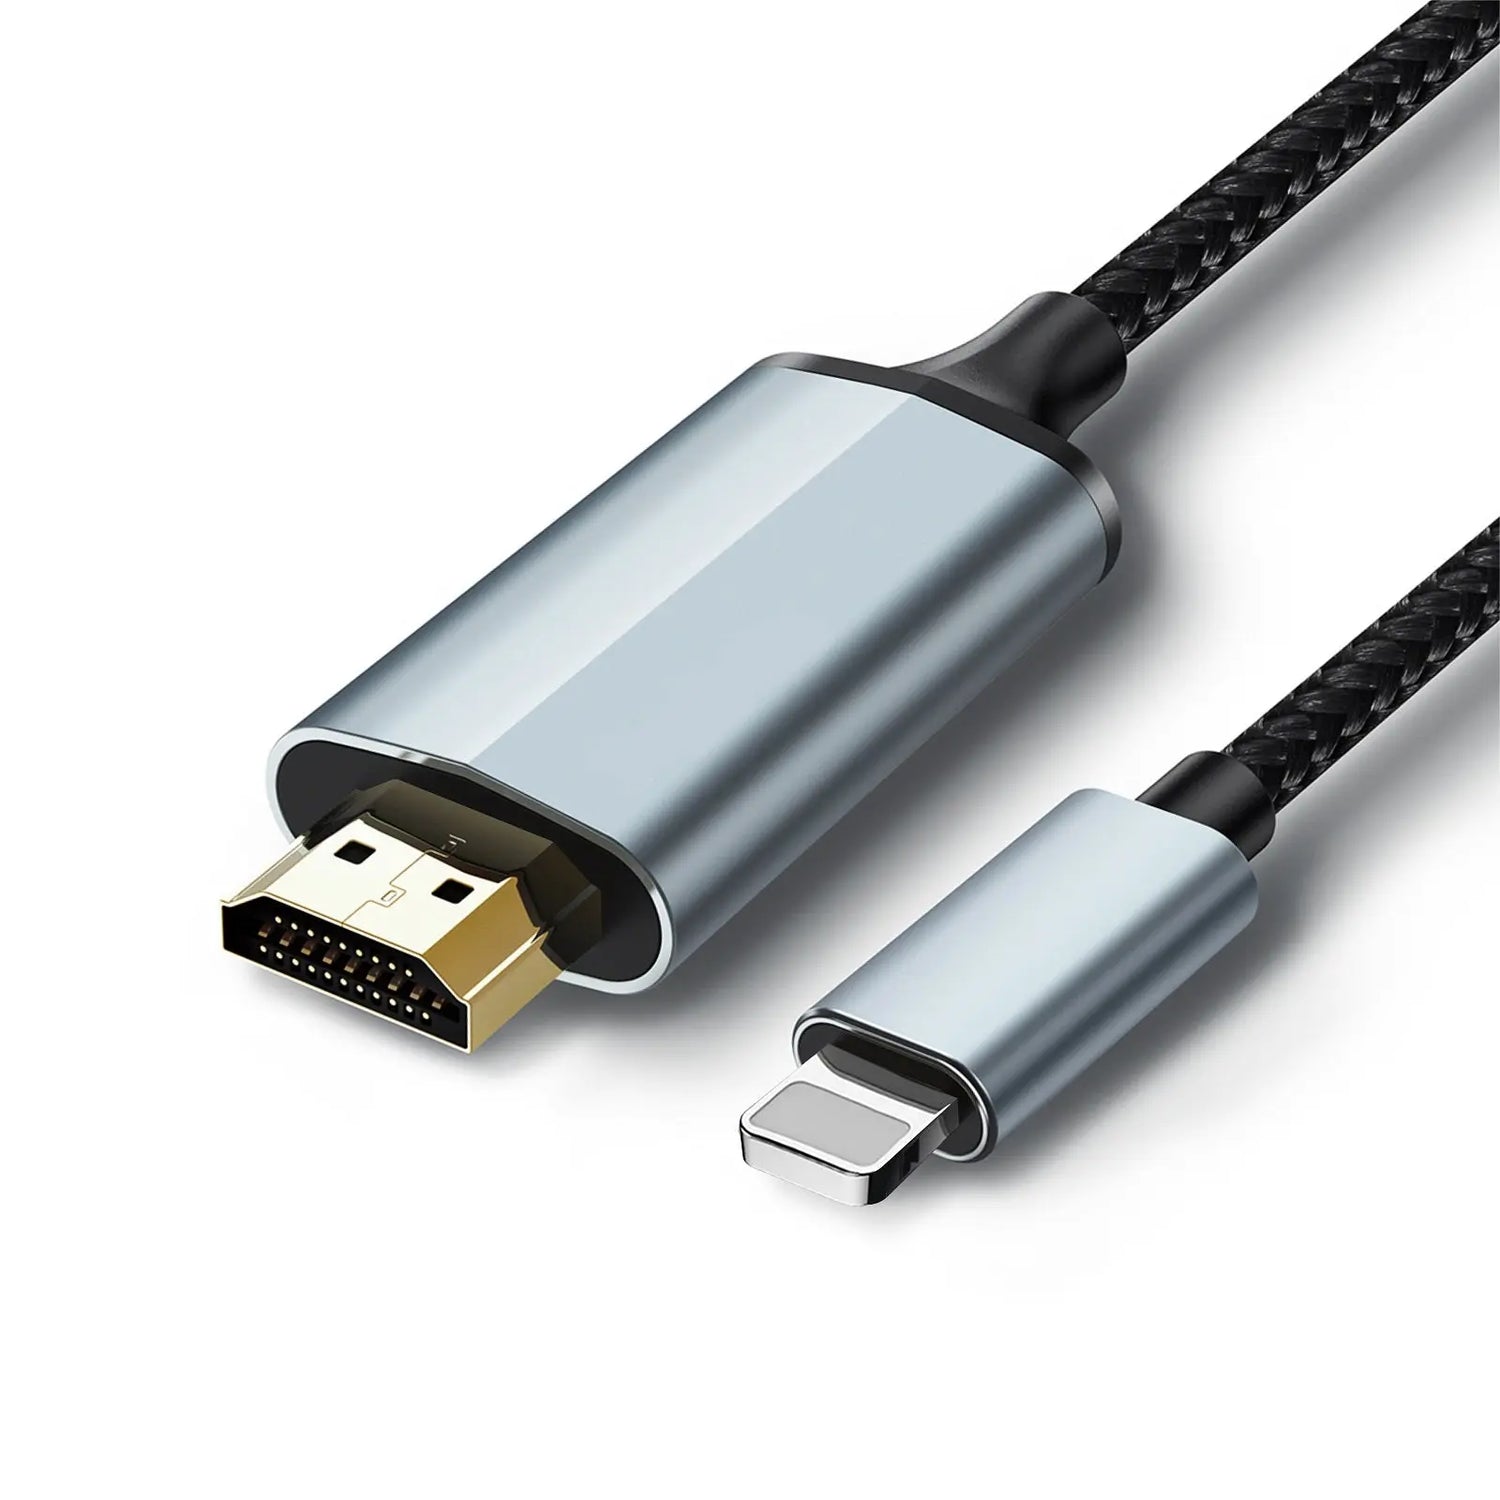 Lightning to HDMI Adapter - Lulaven